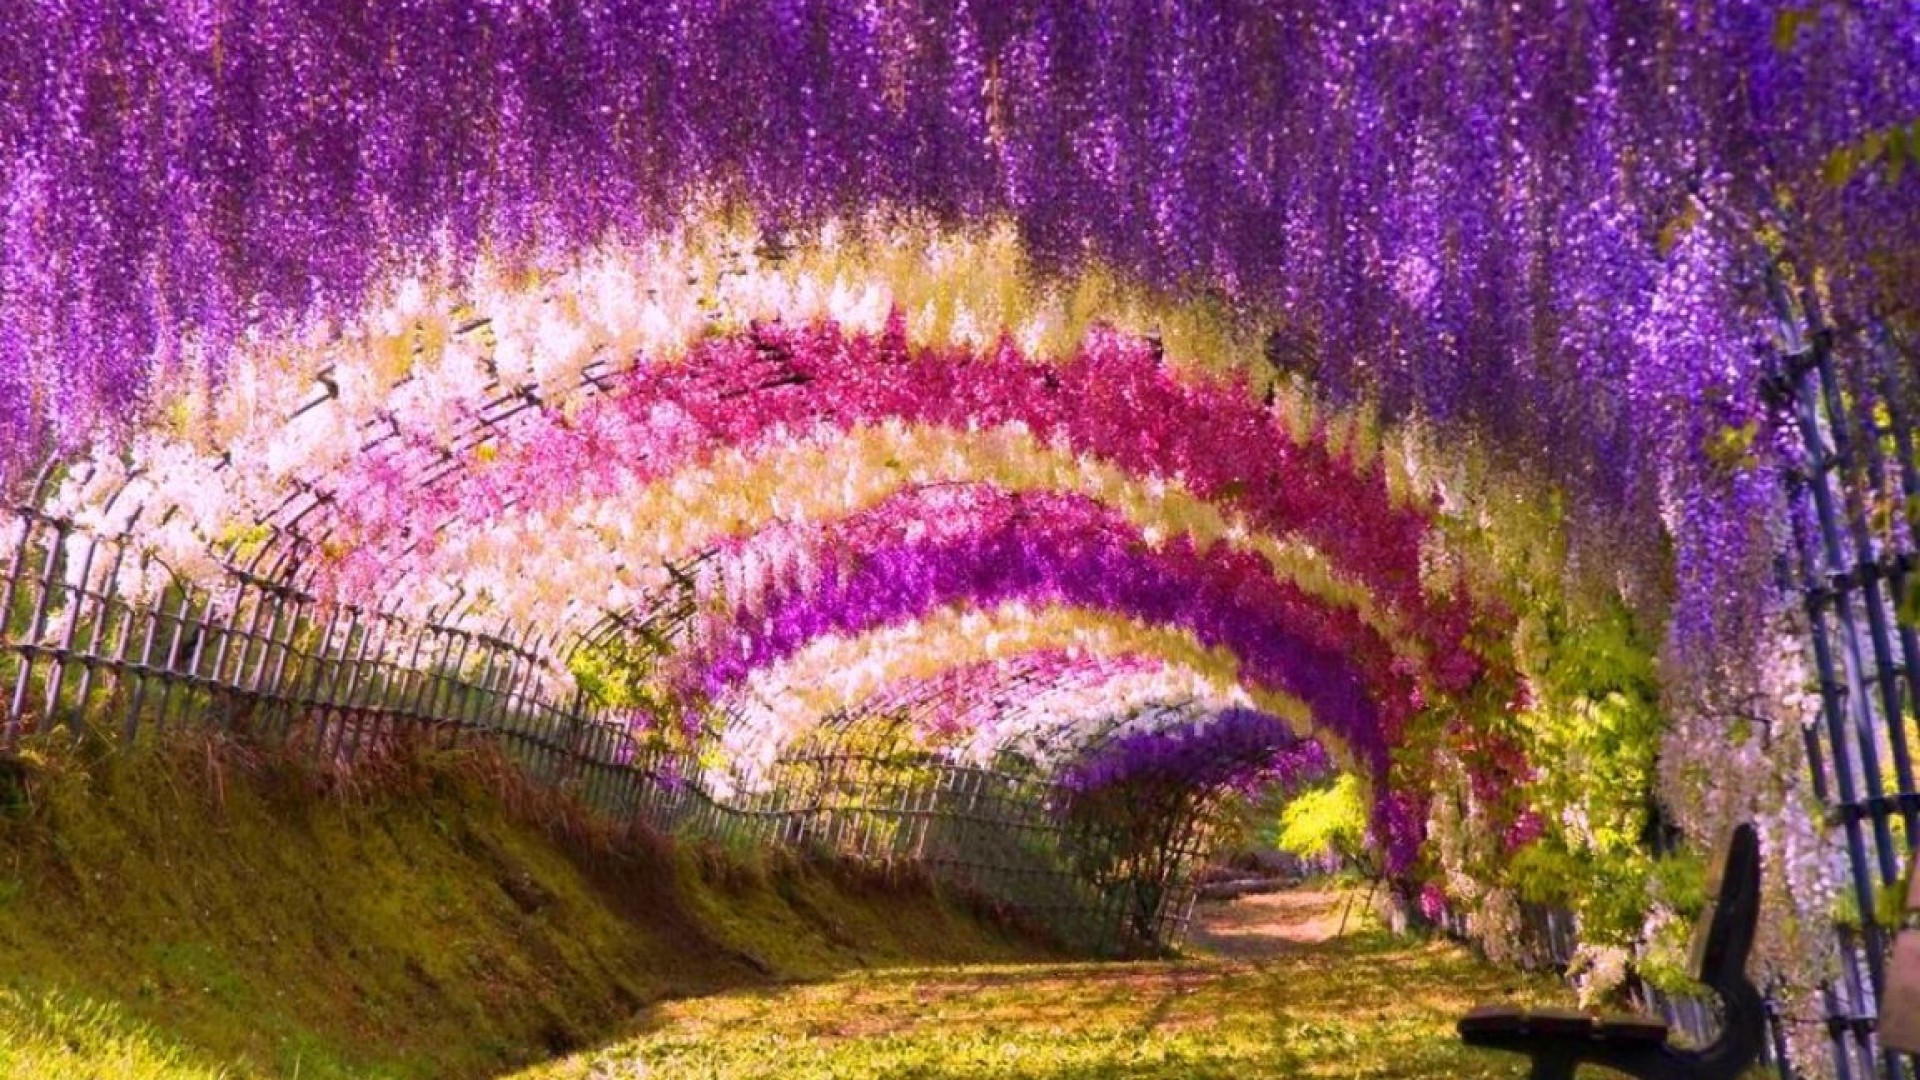 1920x1080, Wisteria Flower Tunnel Wallpaper 
 Data - Most Beautiful Nature Place In The World - HD Wallpaper 